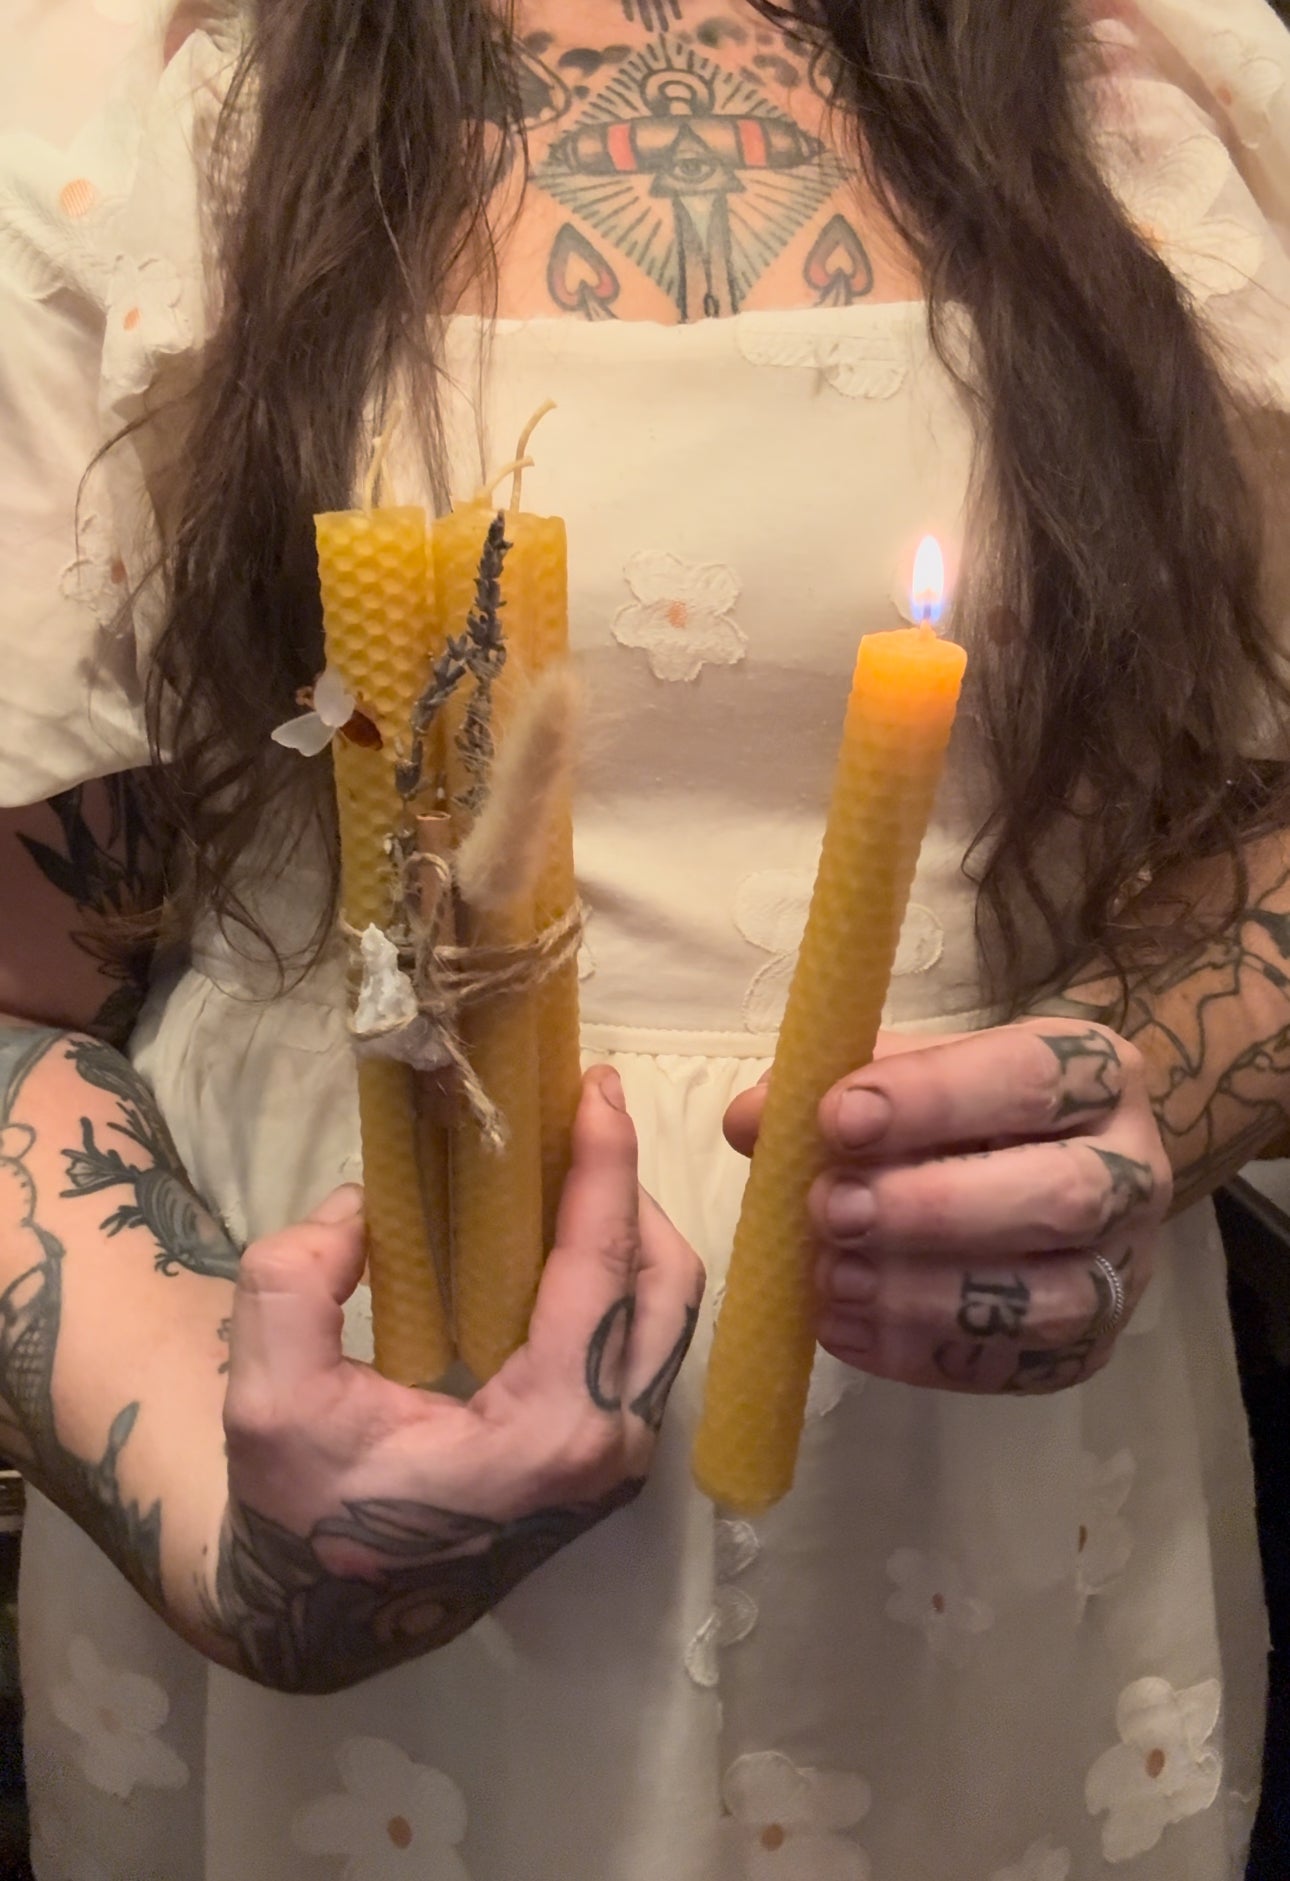 Hand rolled Beeswax Candles